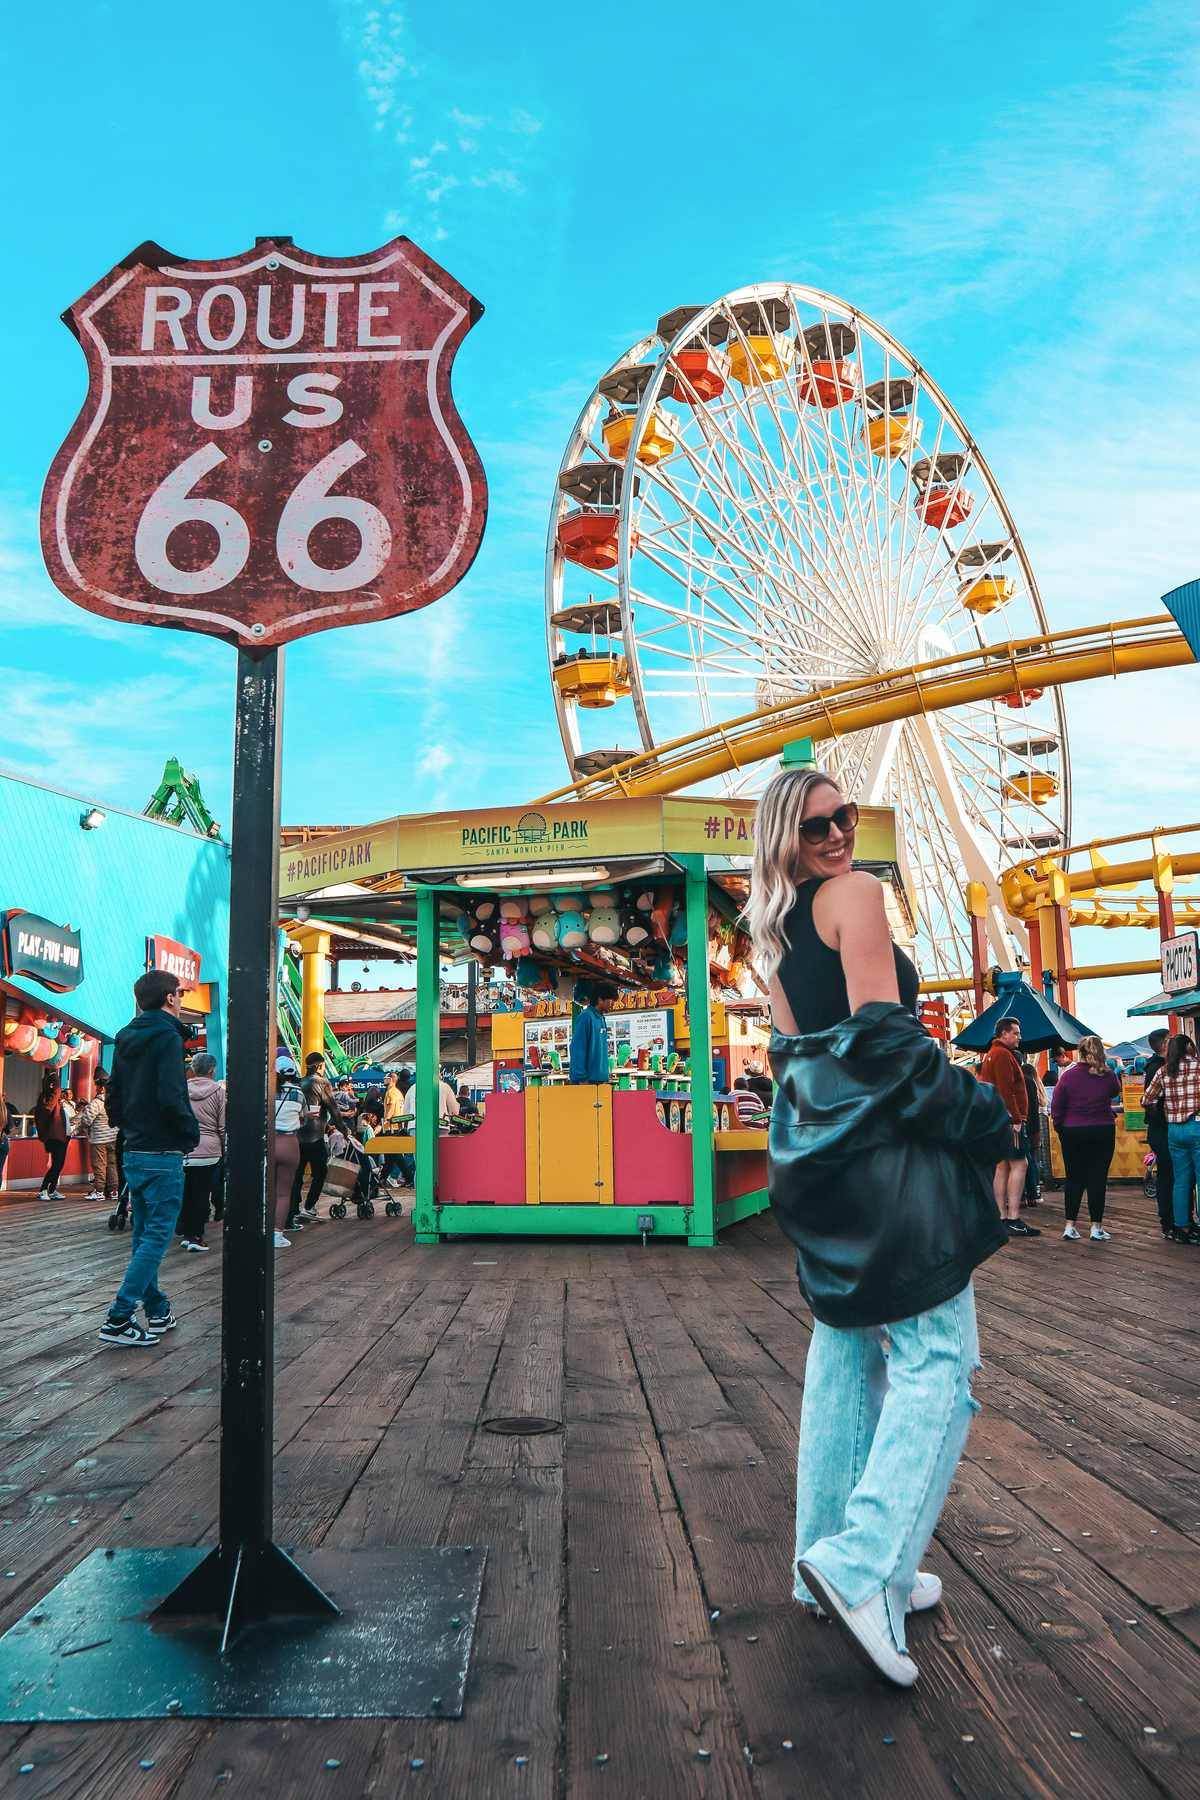 Route 66 sign at the Santa Monica Pier in Los Angeles